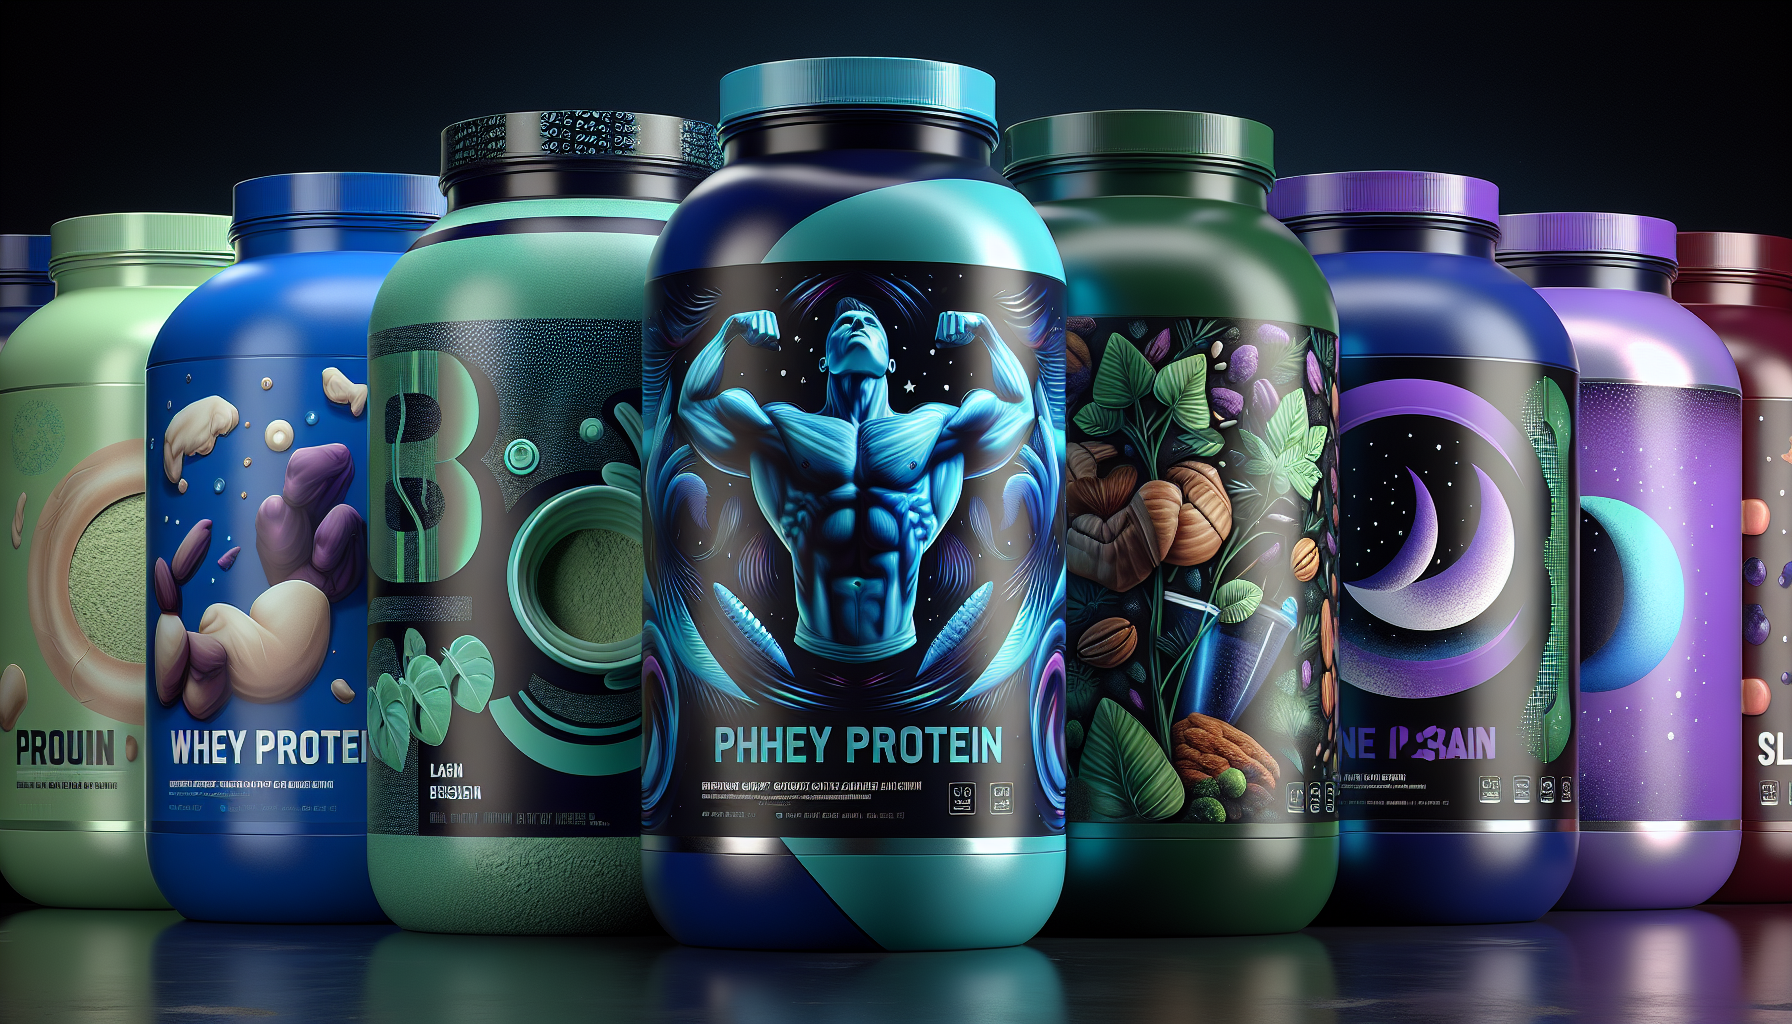 Various types of protein powders in colorful packaging